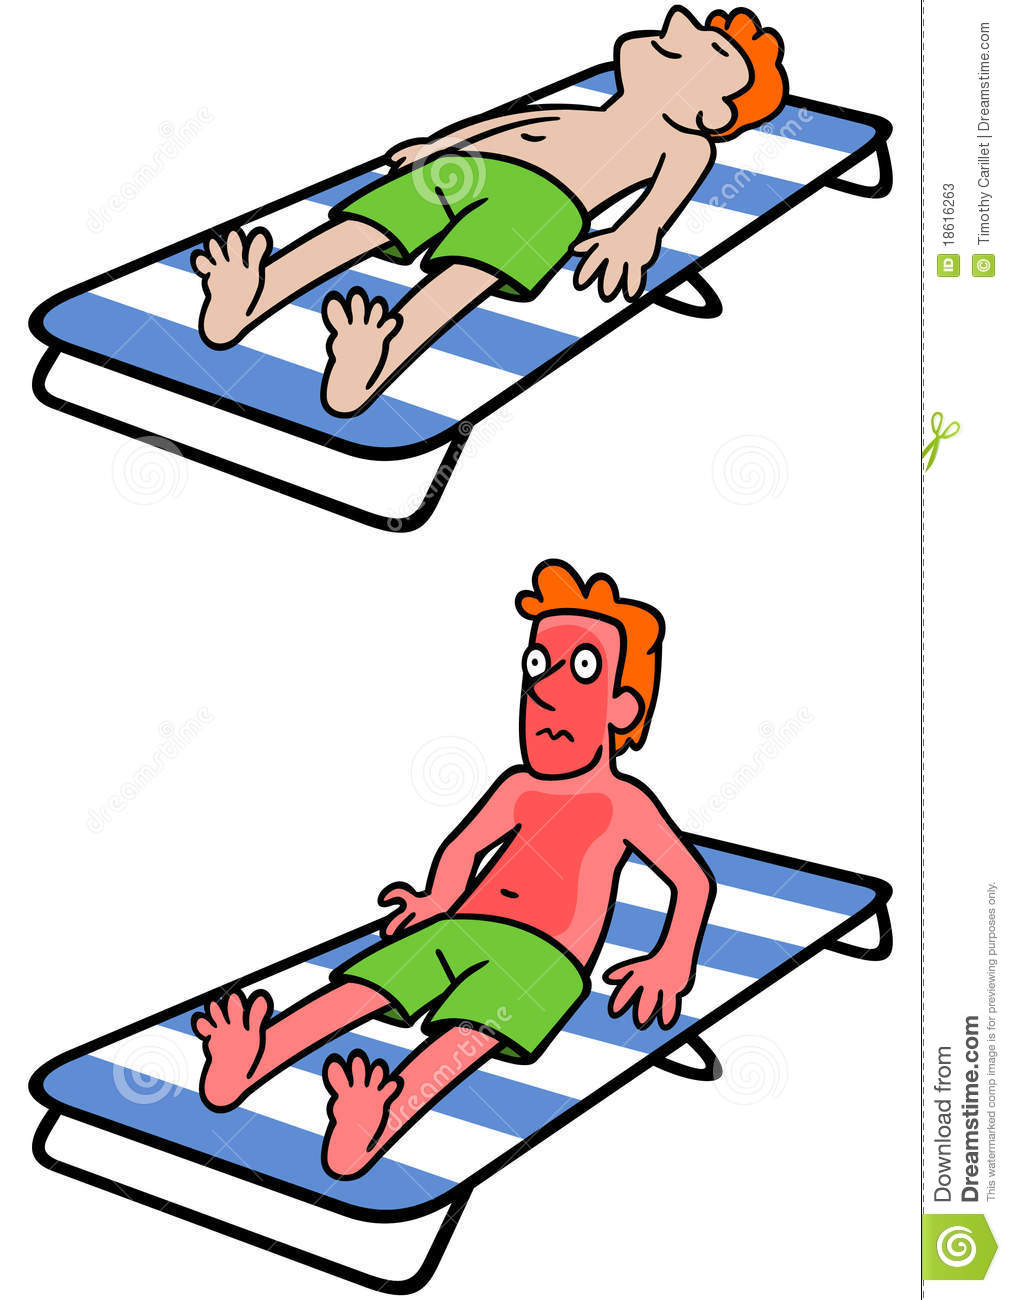 Comic Portrayal Of A Man Who Neglected To Use Sunscreen 